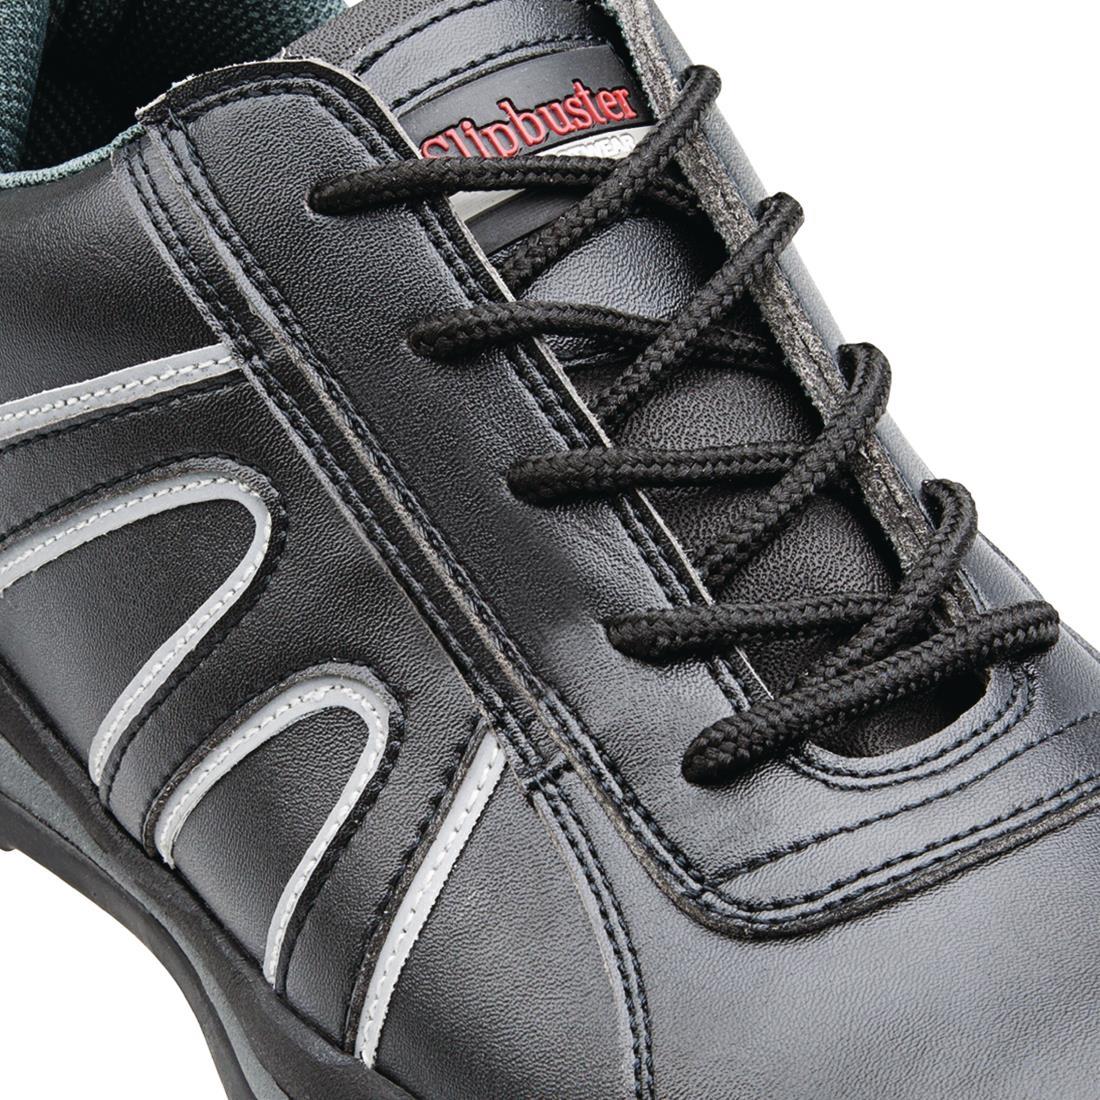 Slipbuster Safety Trainers Black 44 - A708-44  - 3